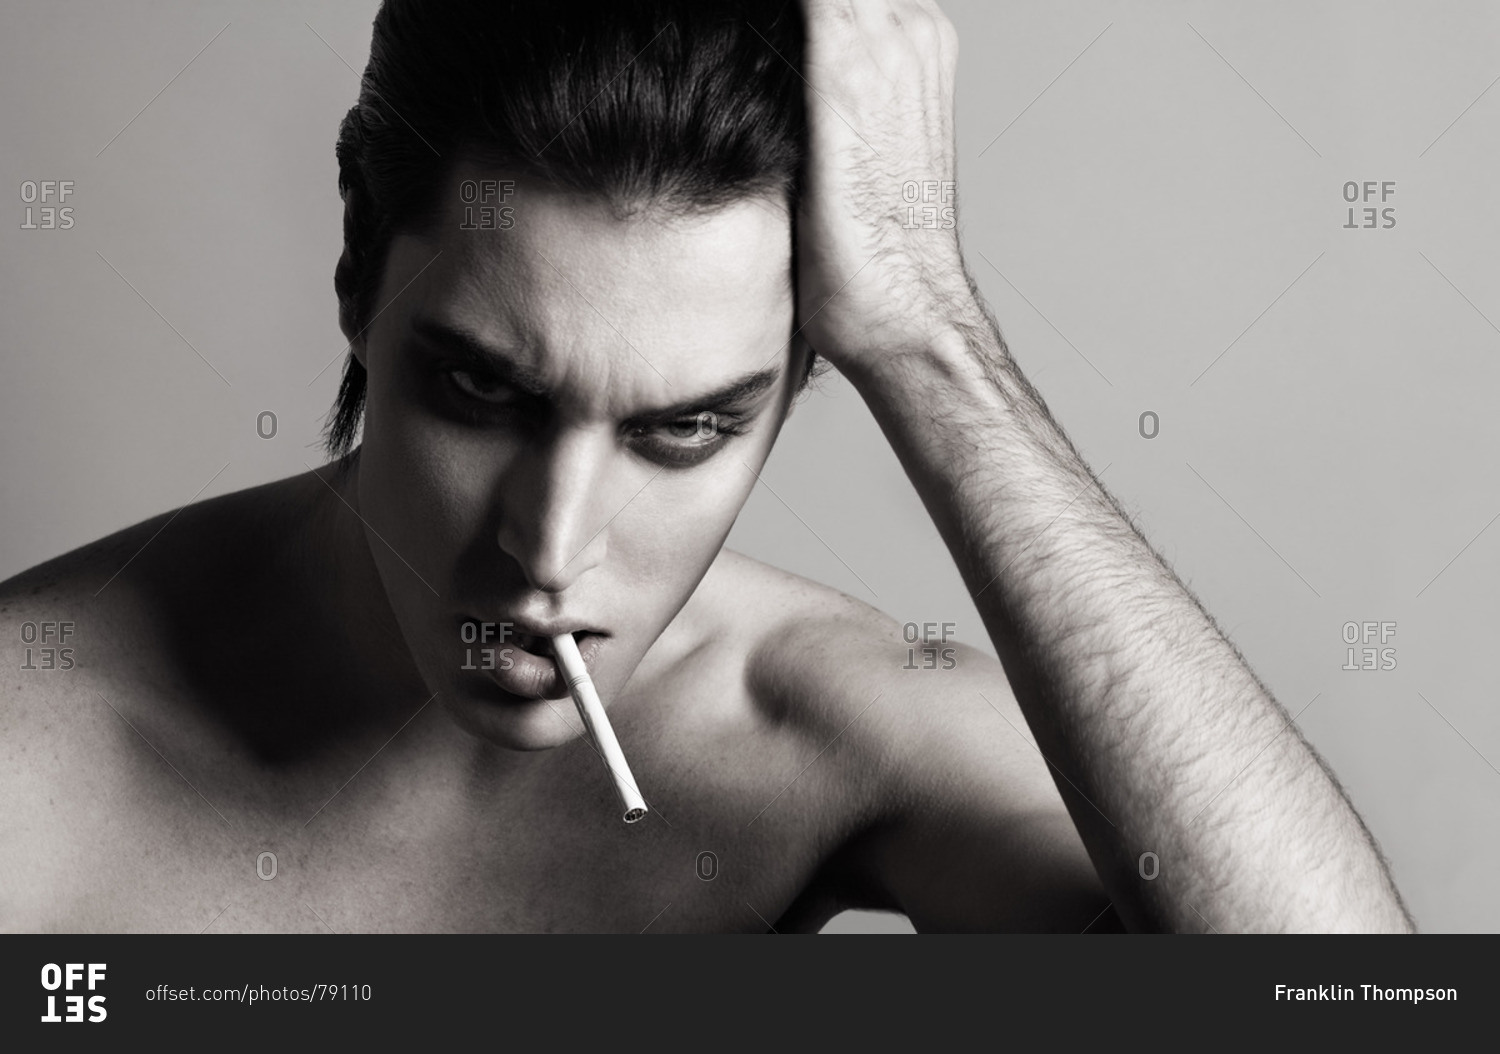 Portrait of an androgynous male model stock photo - OFFSET